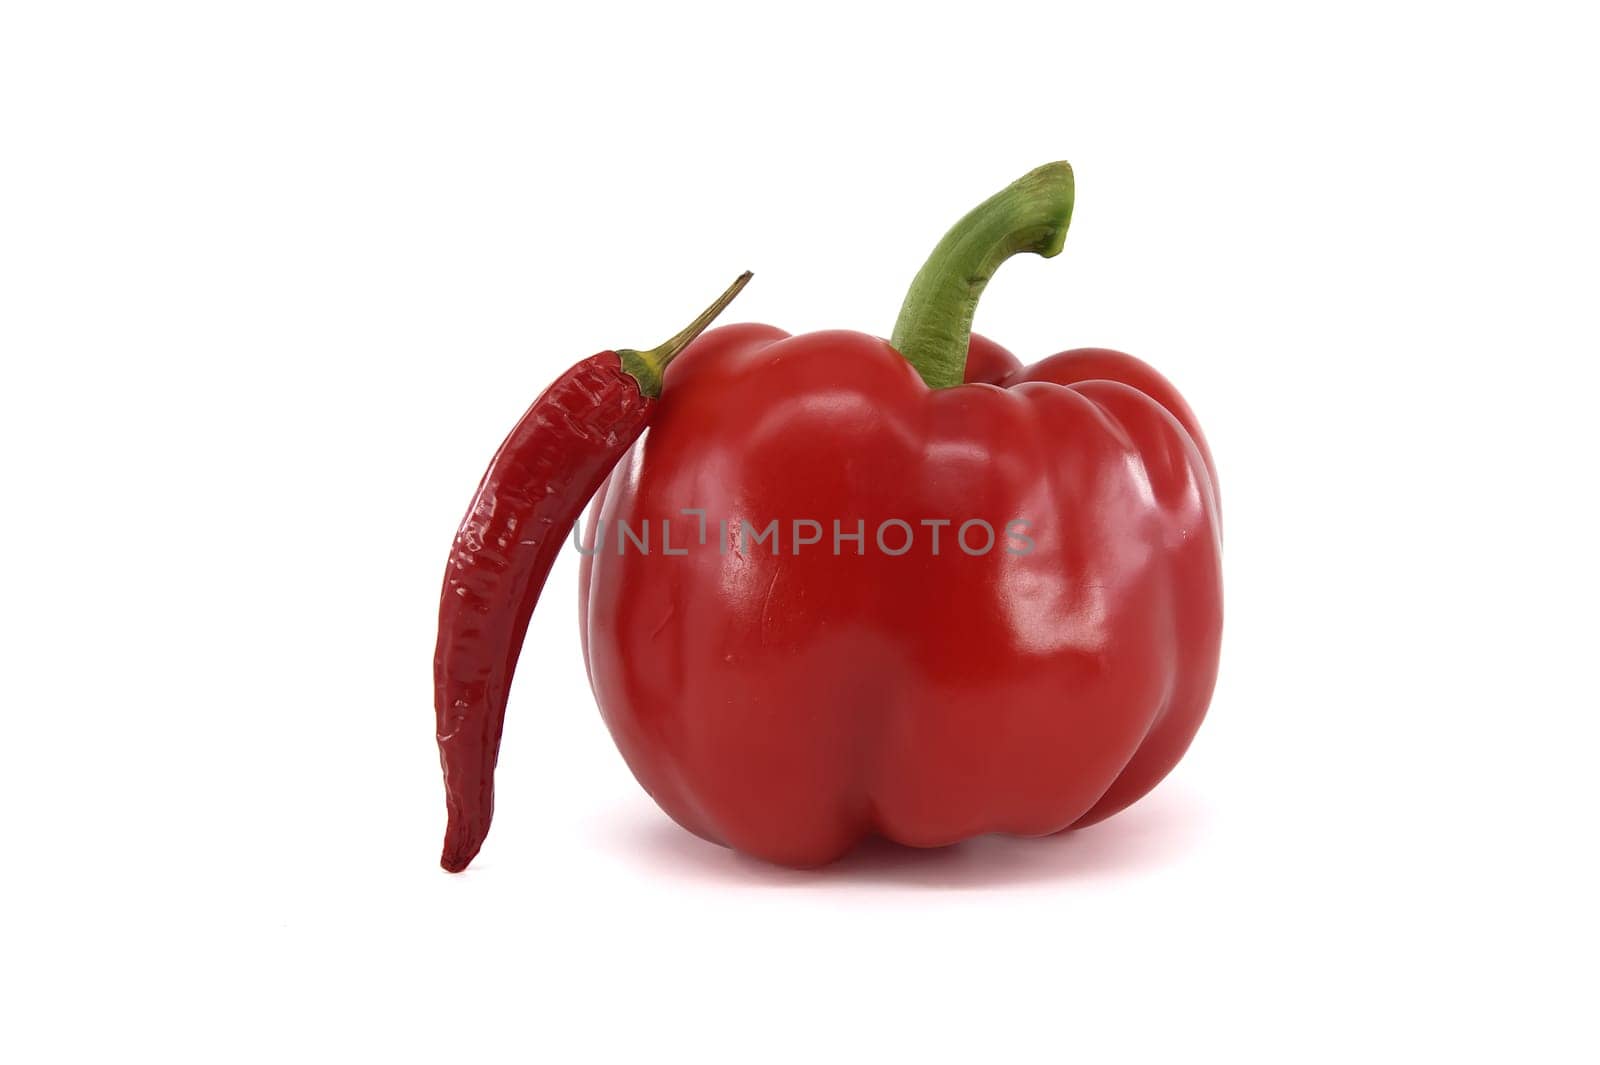 Dried chili peppers and fresh red bell peppers isolated on white background